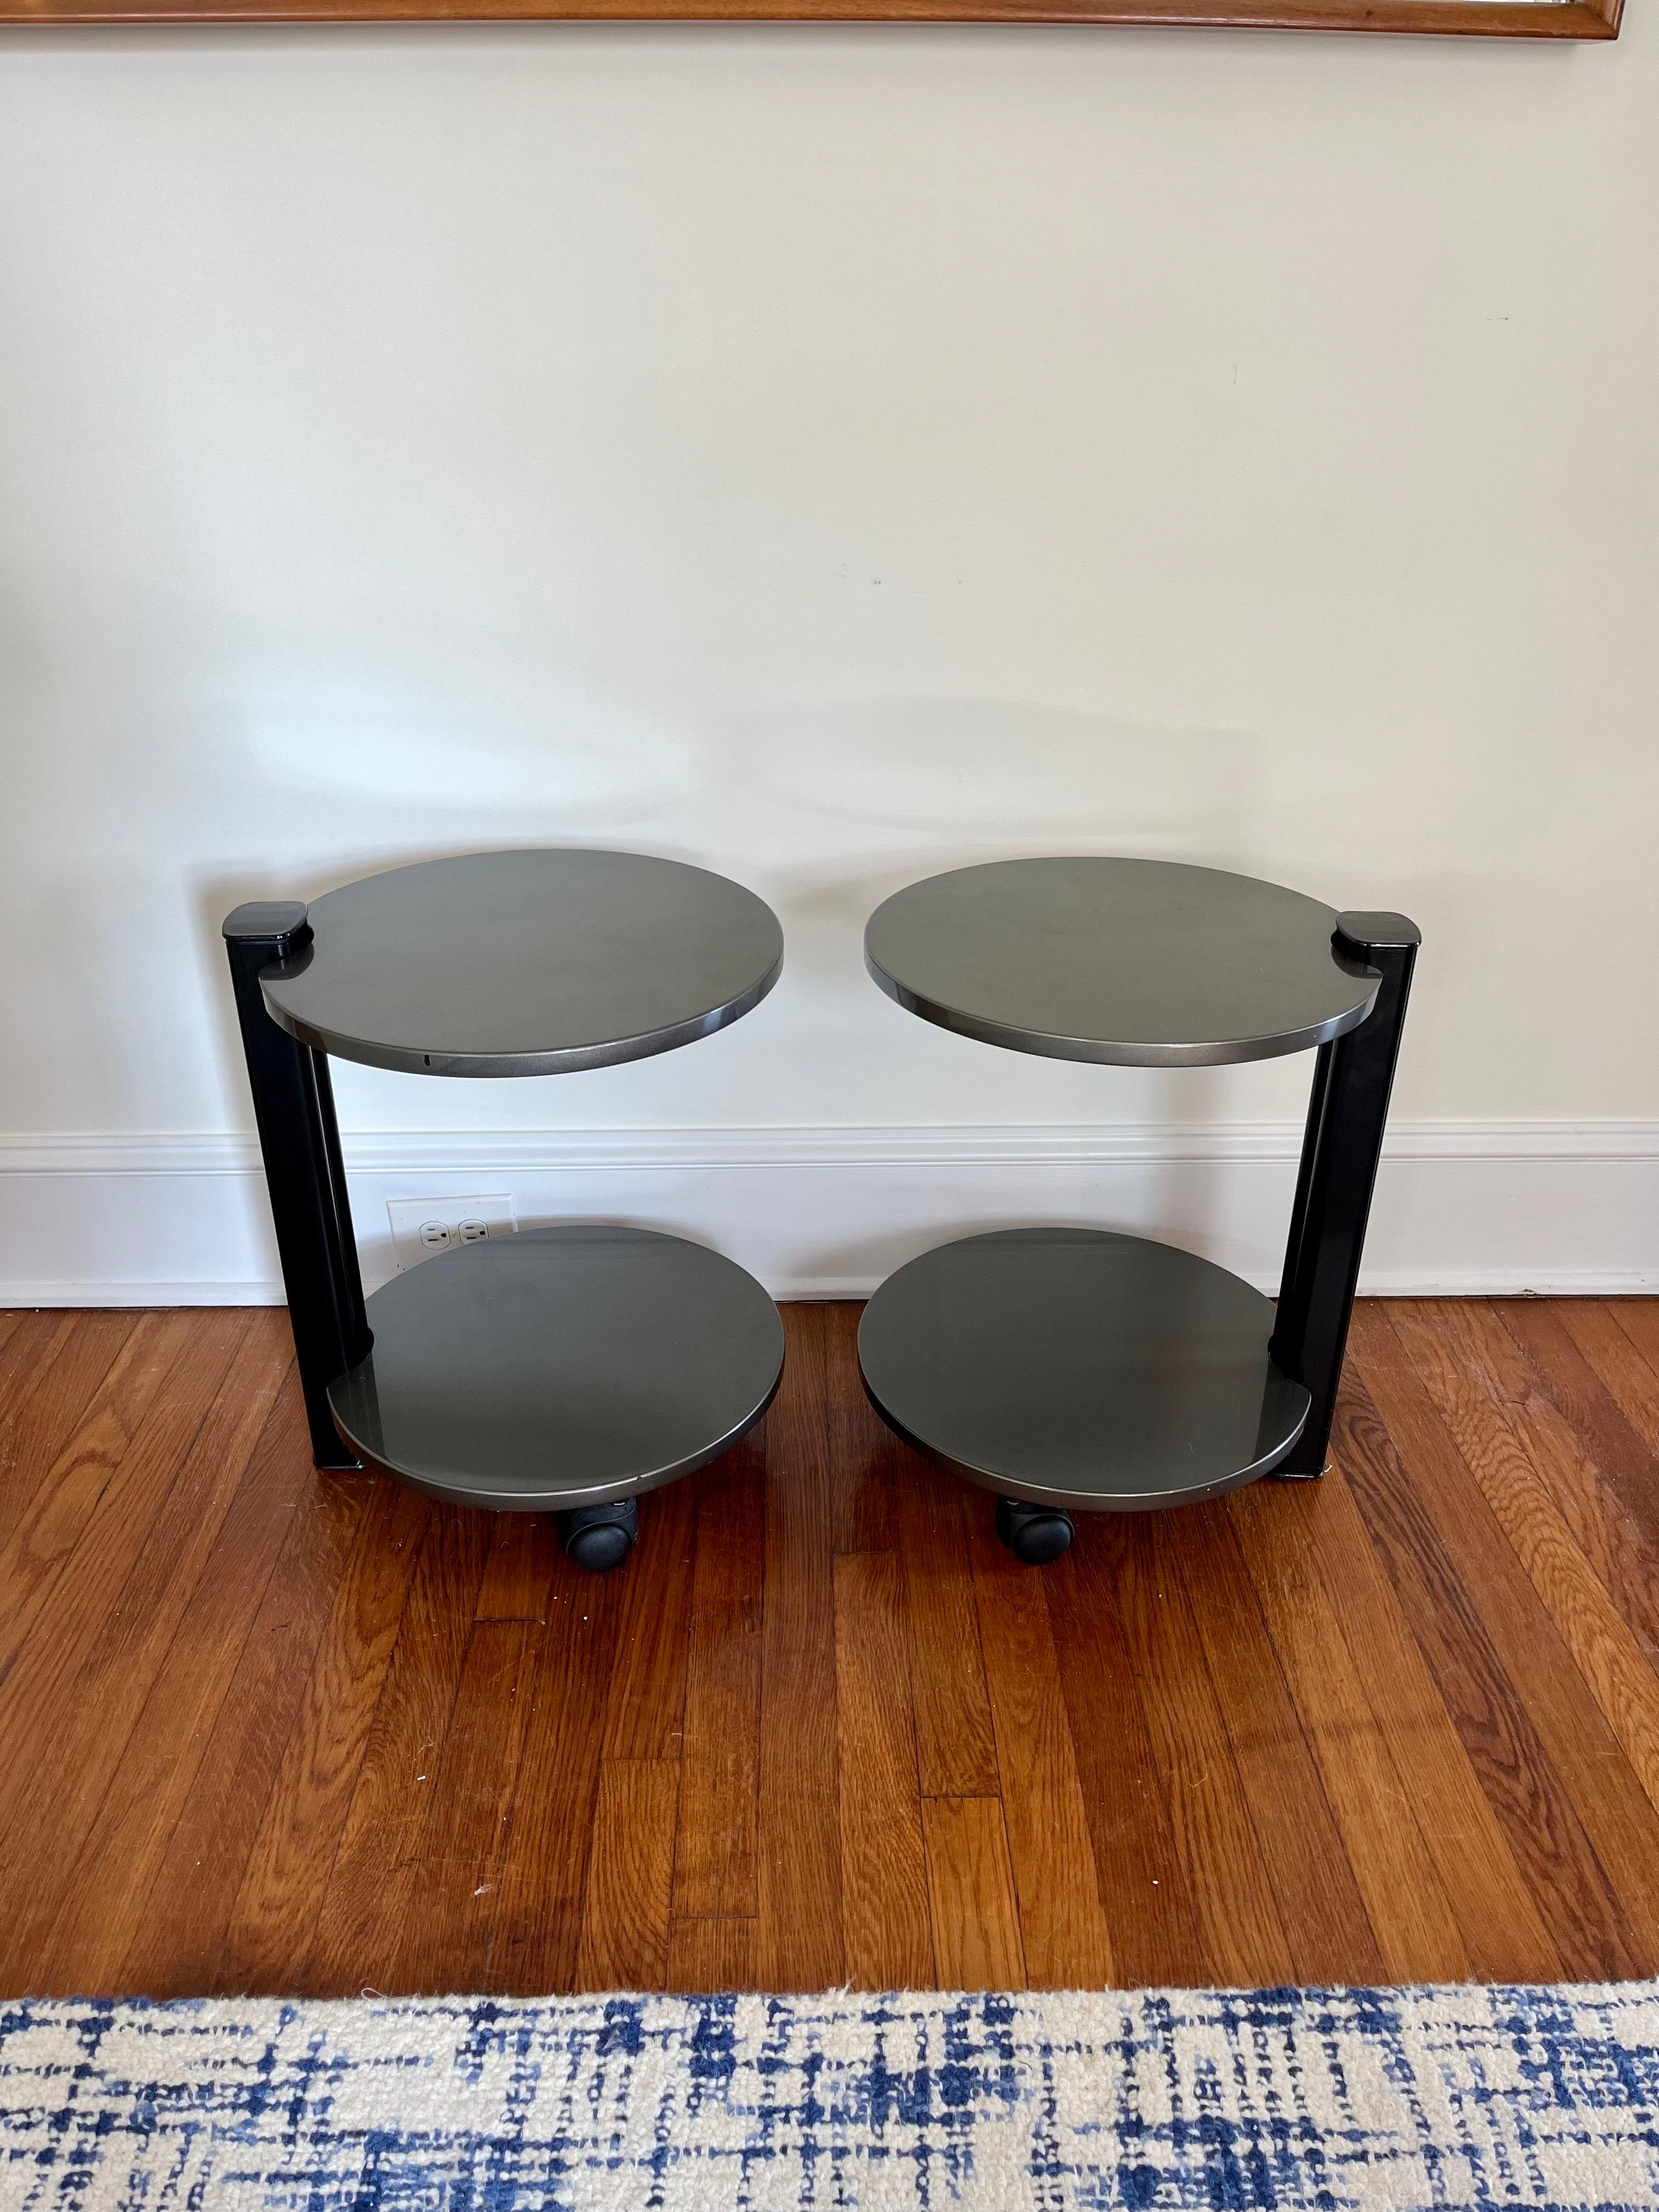 North American Post-Modern Mixed Media Two Tier Side Table